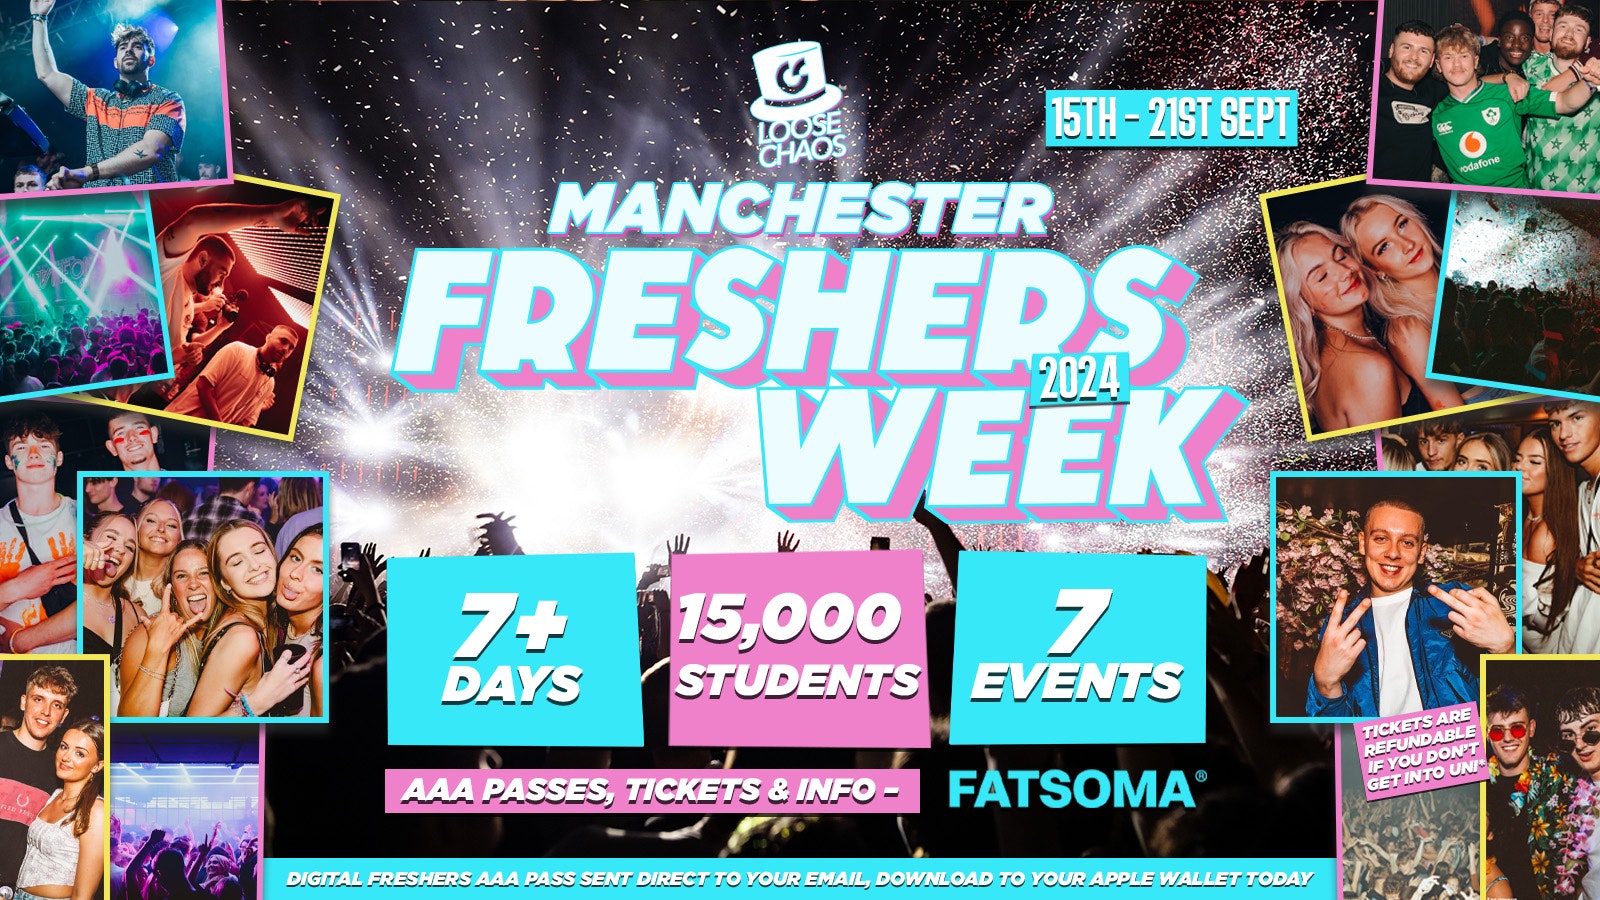 THE LOOSECHAOS MANCHESTER FRESHERS WEEK 🪩💞 7+ EVENTS OVER 7+ DAYS // INCLUDES TROPILOCO – JOSHUA BROOK + ARK & MORE // LESS THAN £1 PER EVENT! MANCHESTER 2024